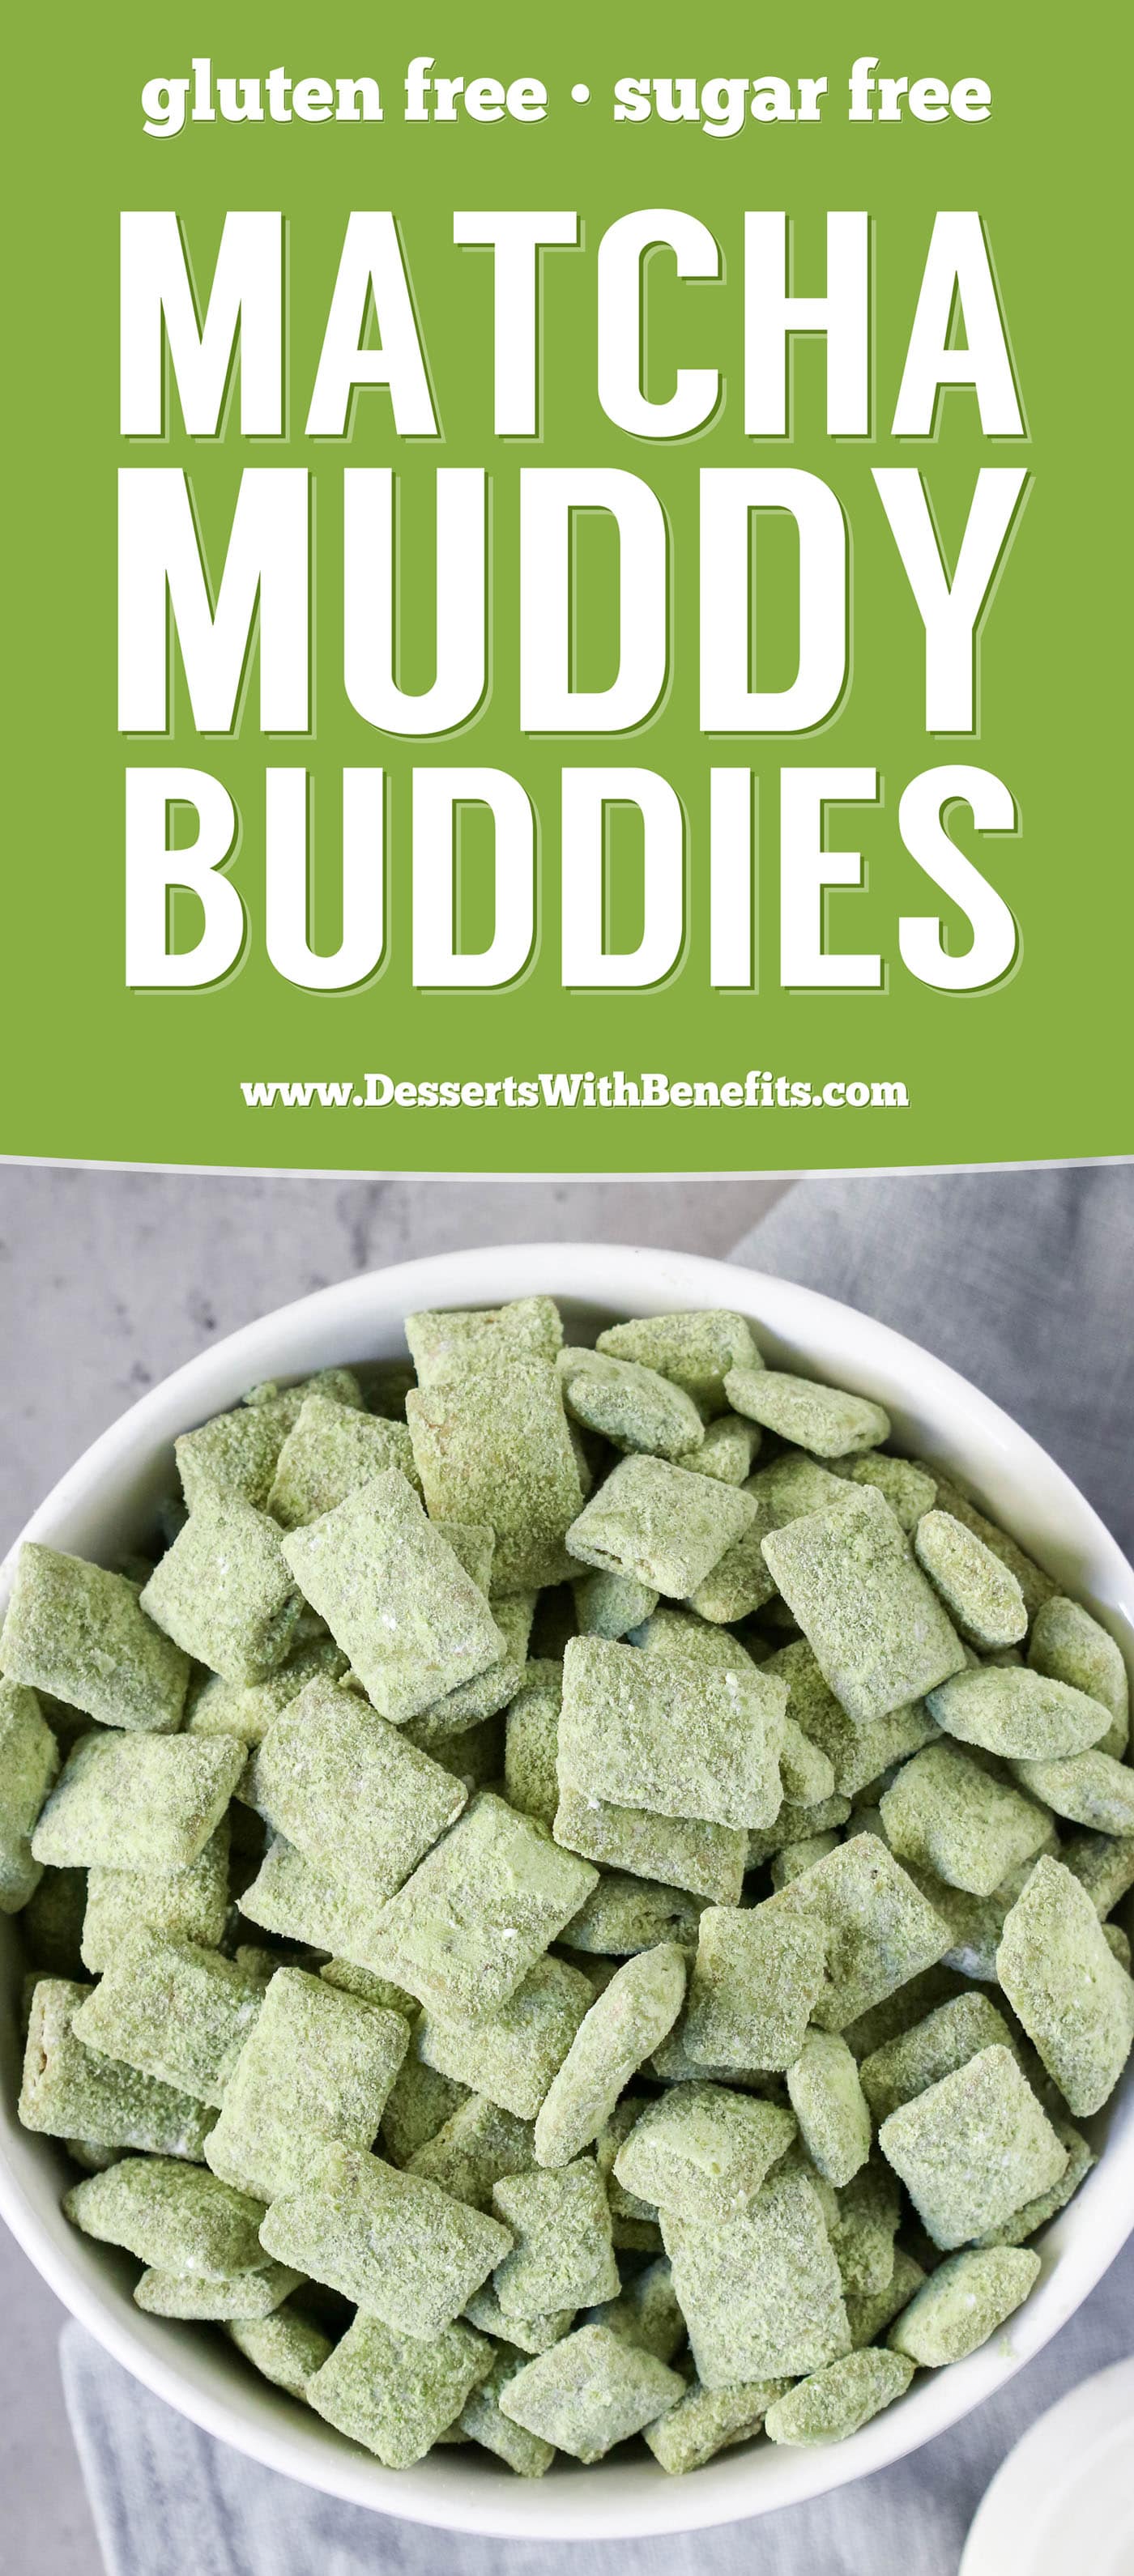 These Matcha Green Tea Muddy Buddies (Puppy Chow recipe) are the perfect, crunchy snack to satisfy the snack monster in you! Easy, no-bake, healthy, high protein, high fiber, and sugar free too.